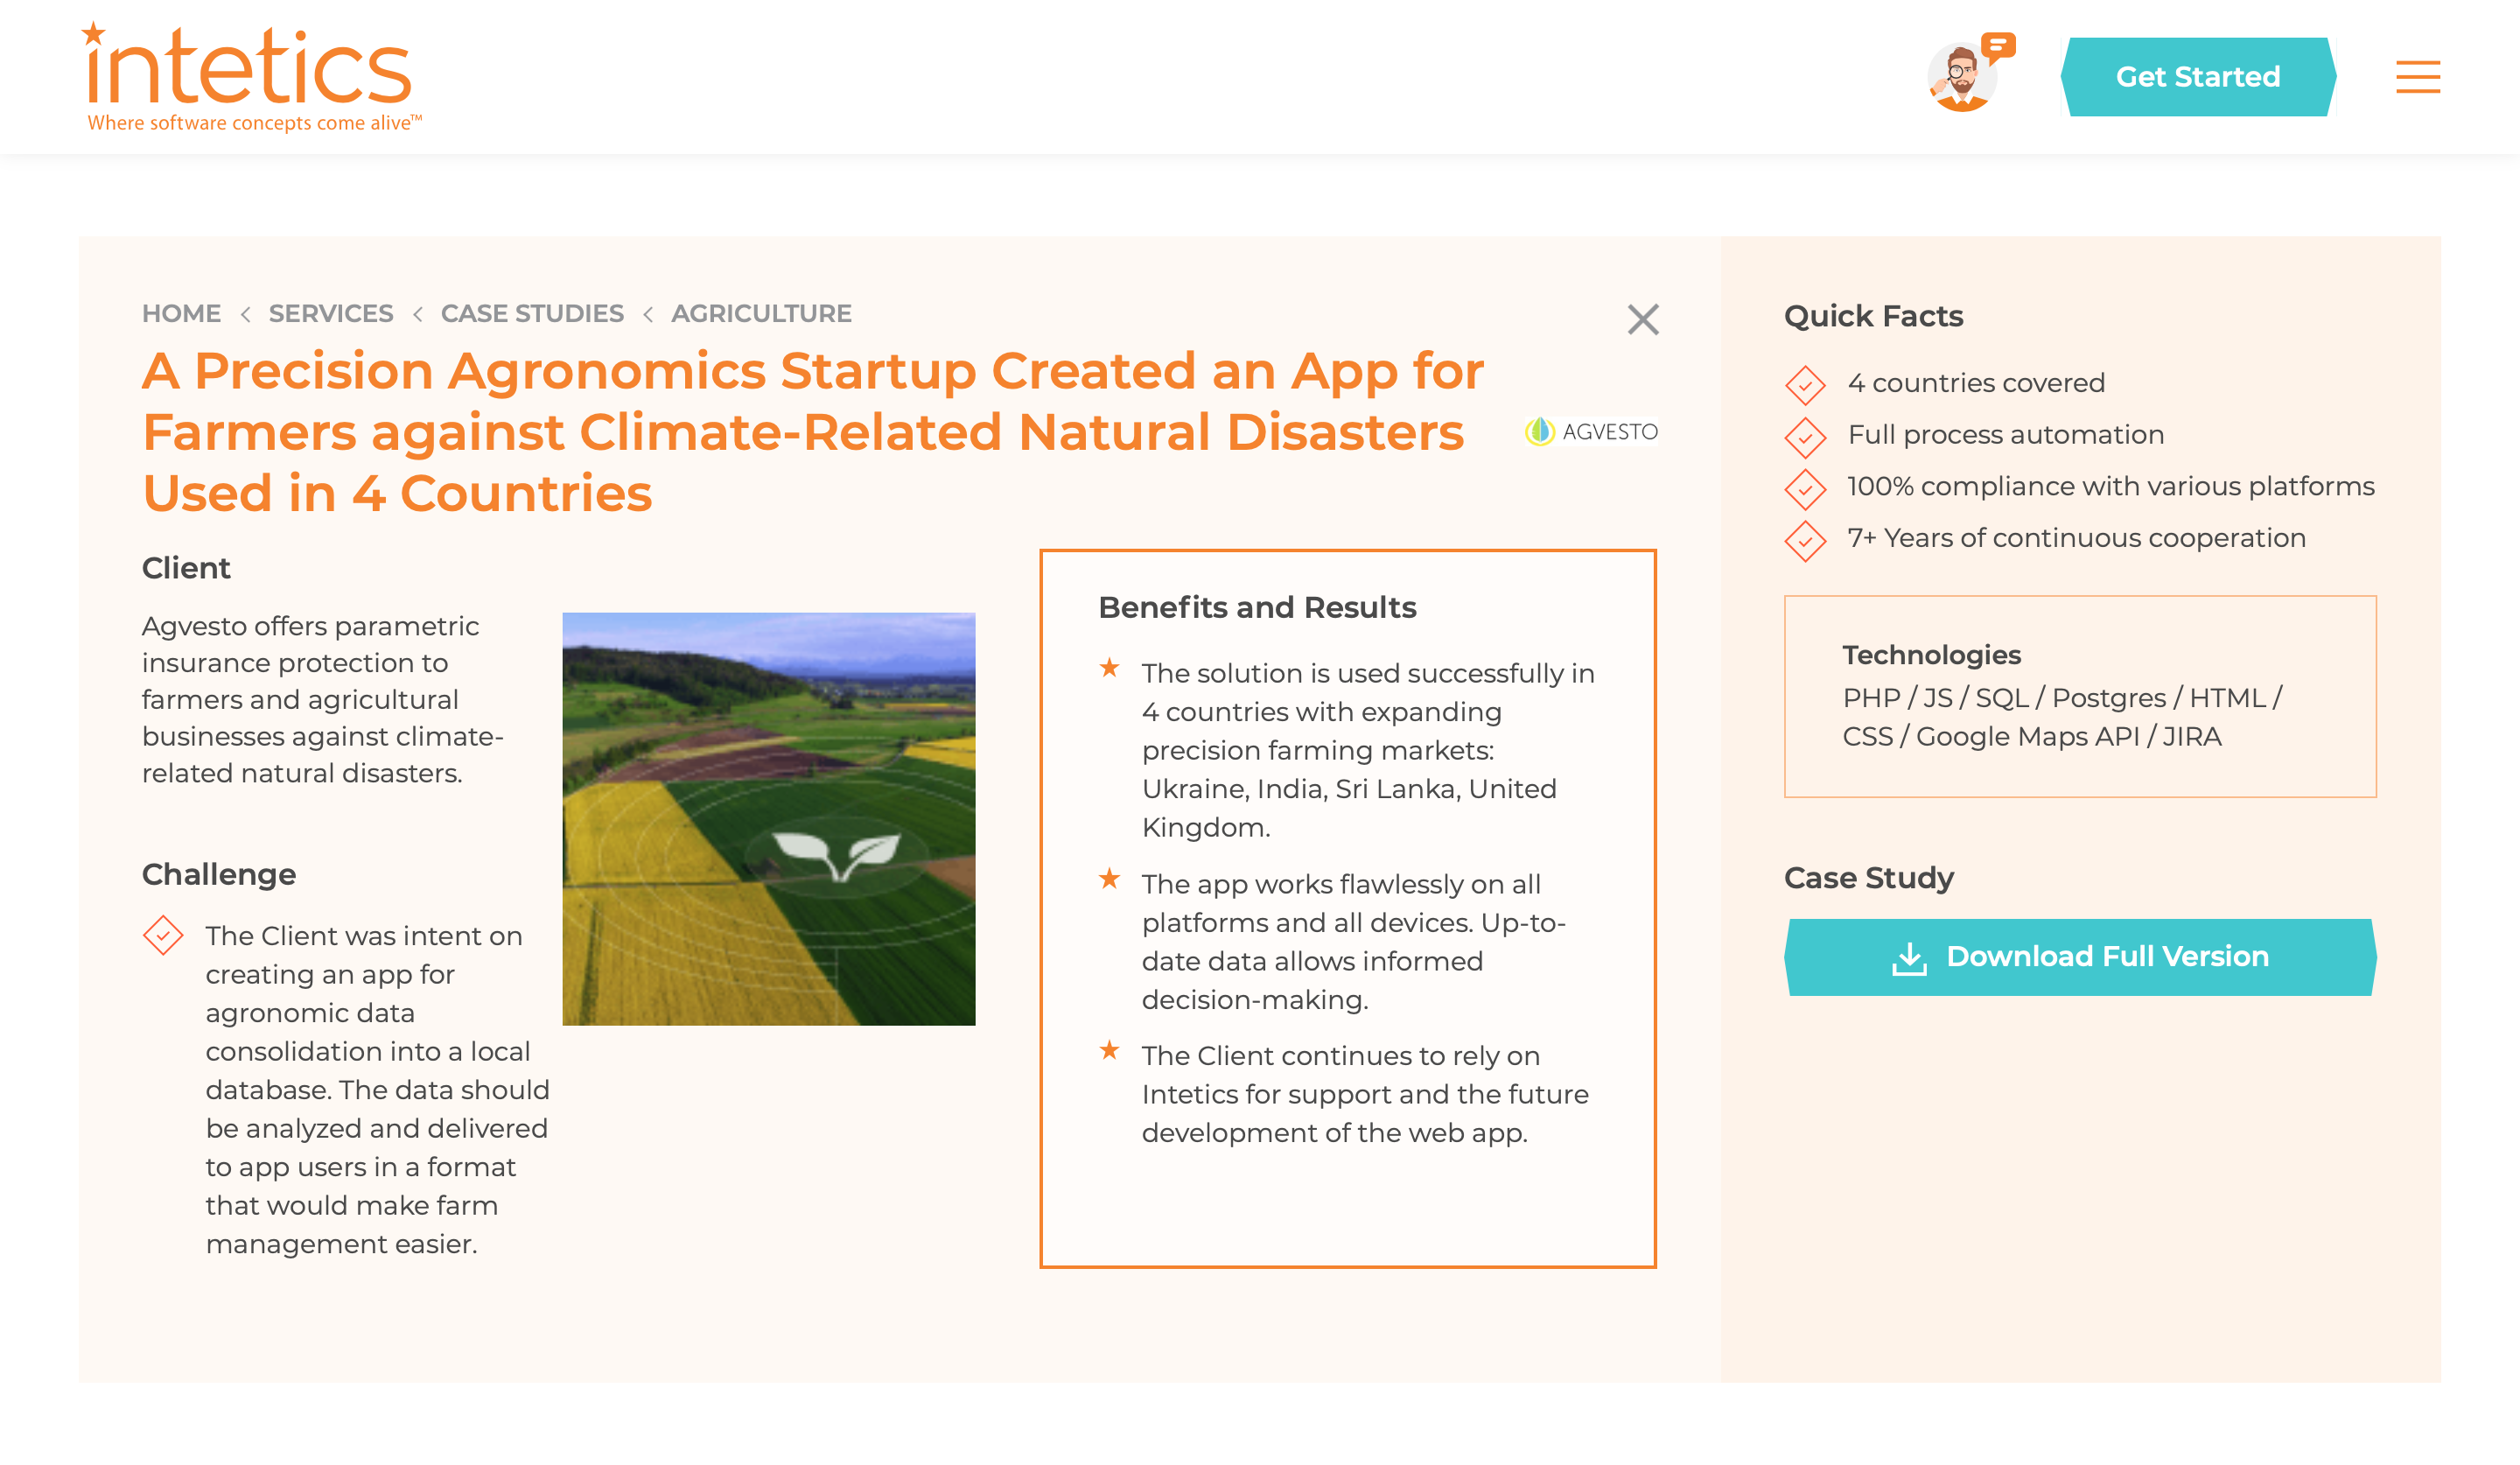 A Precision Agronomics Startup Created an App for Farmers against Climate-Related Natural Disasters Used in 4 Countries